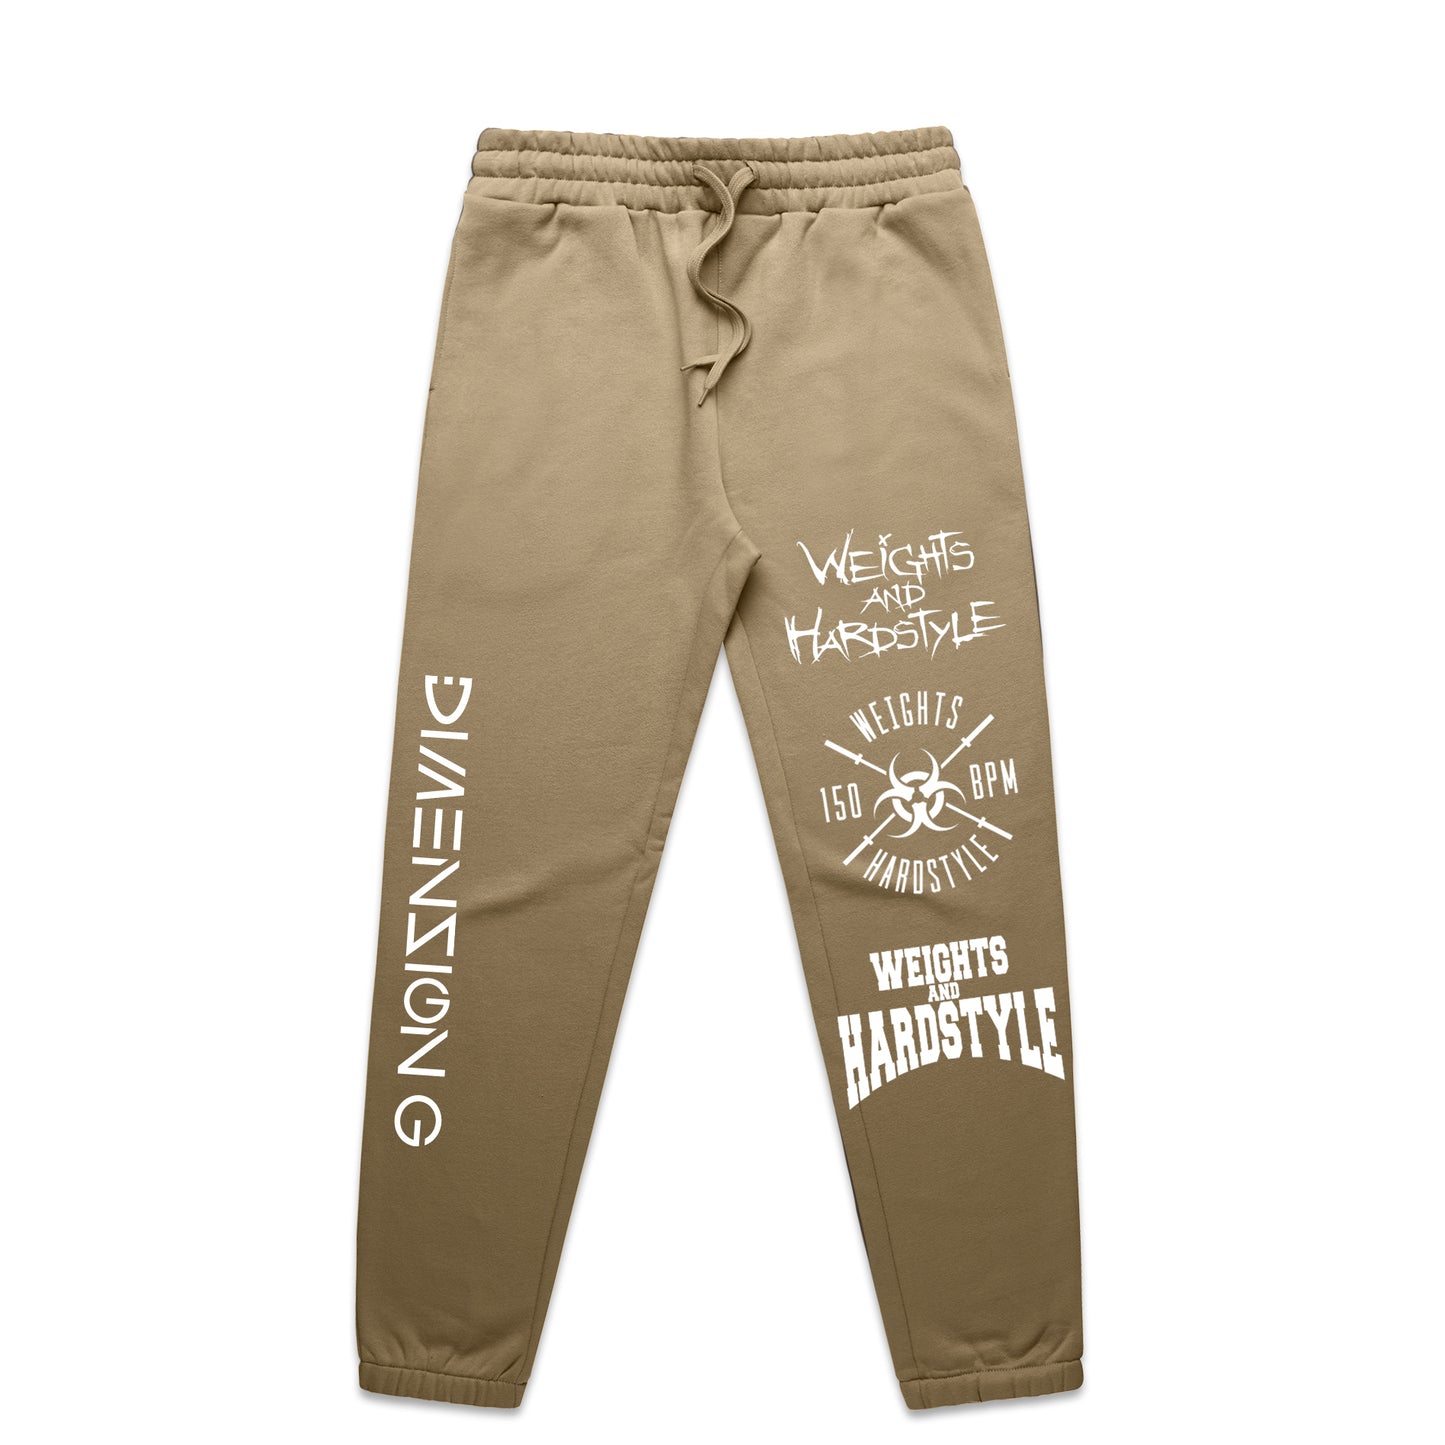 Weights and Hardstyle Joggers